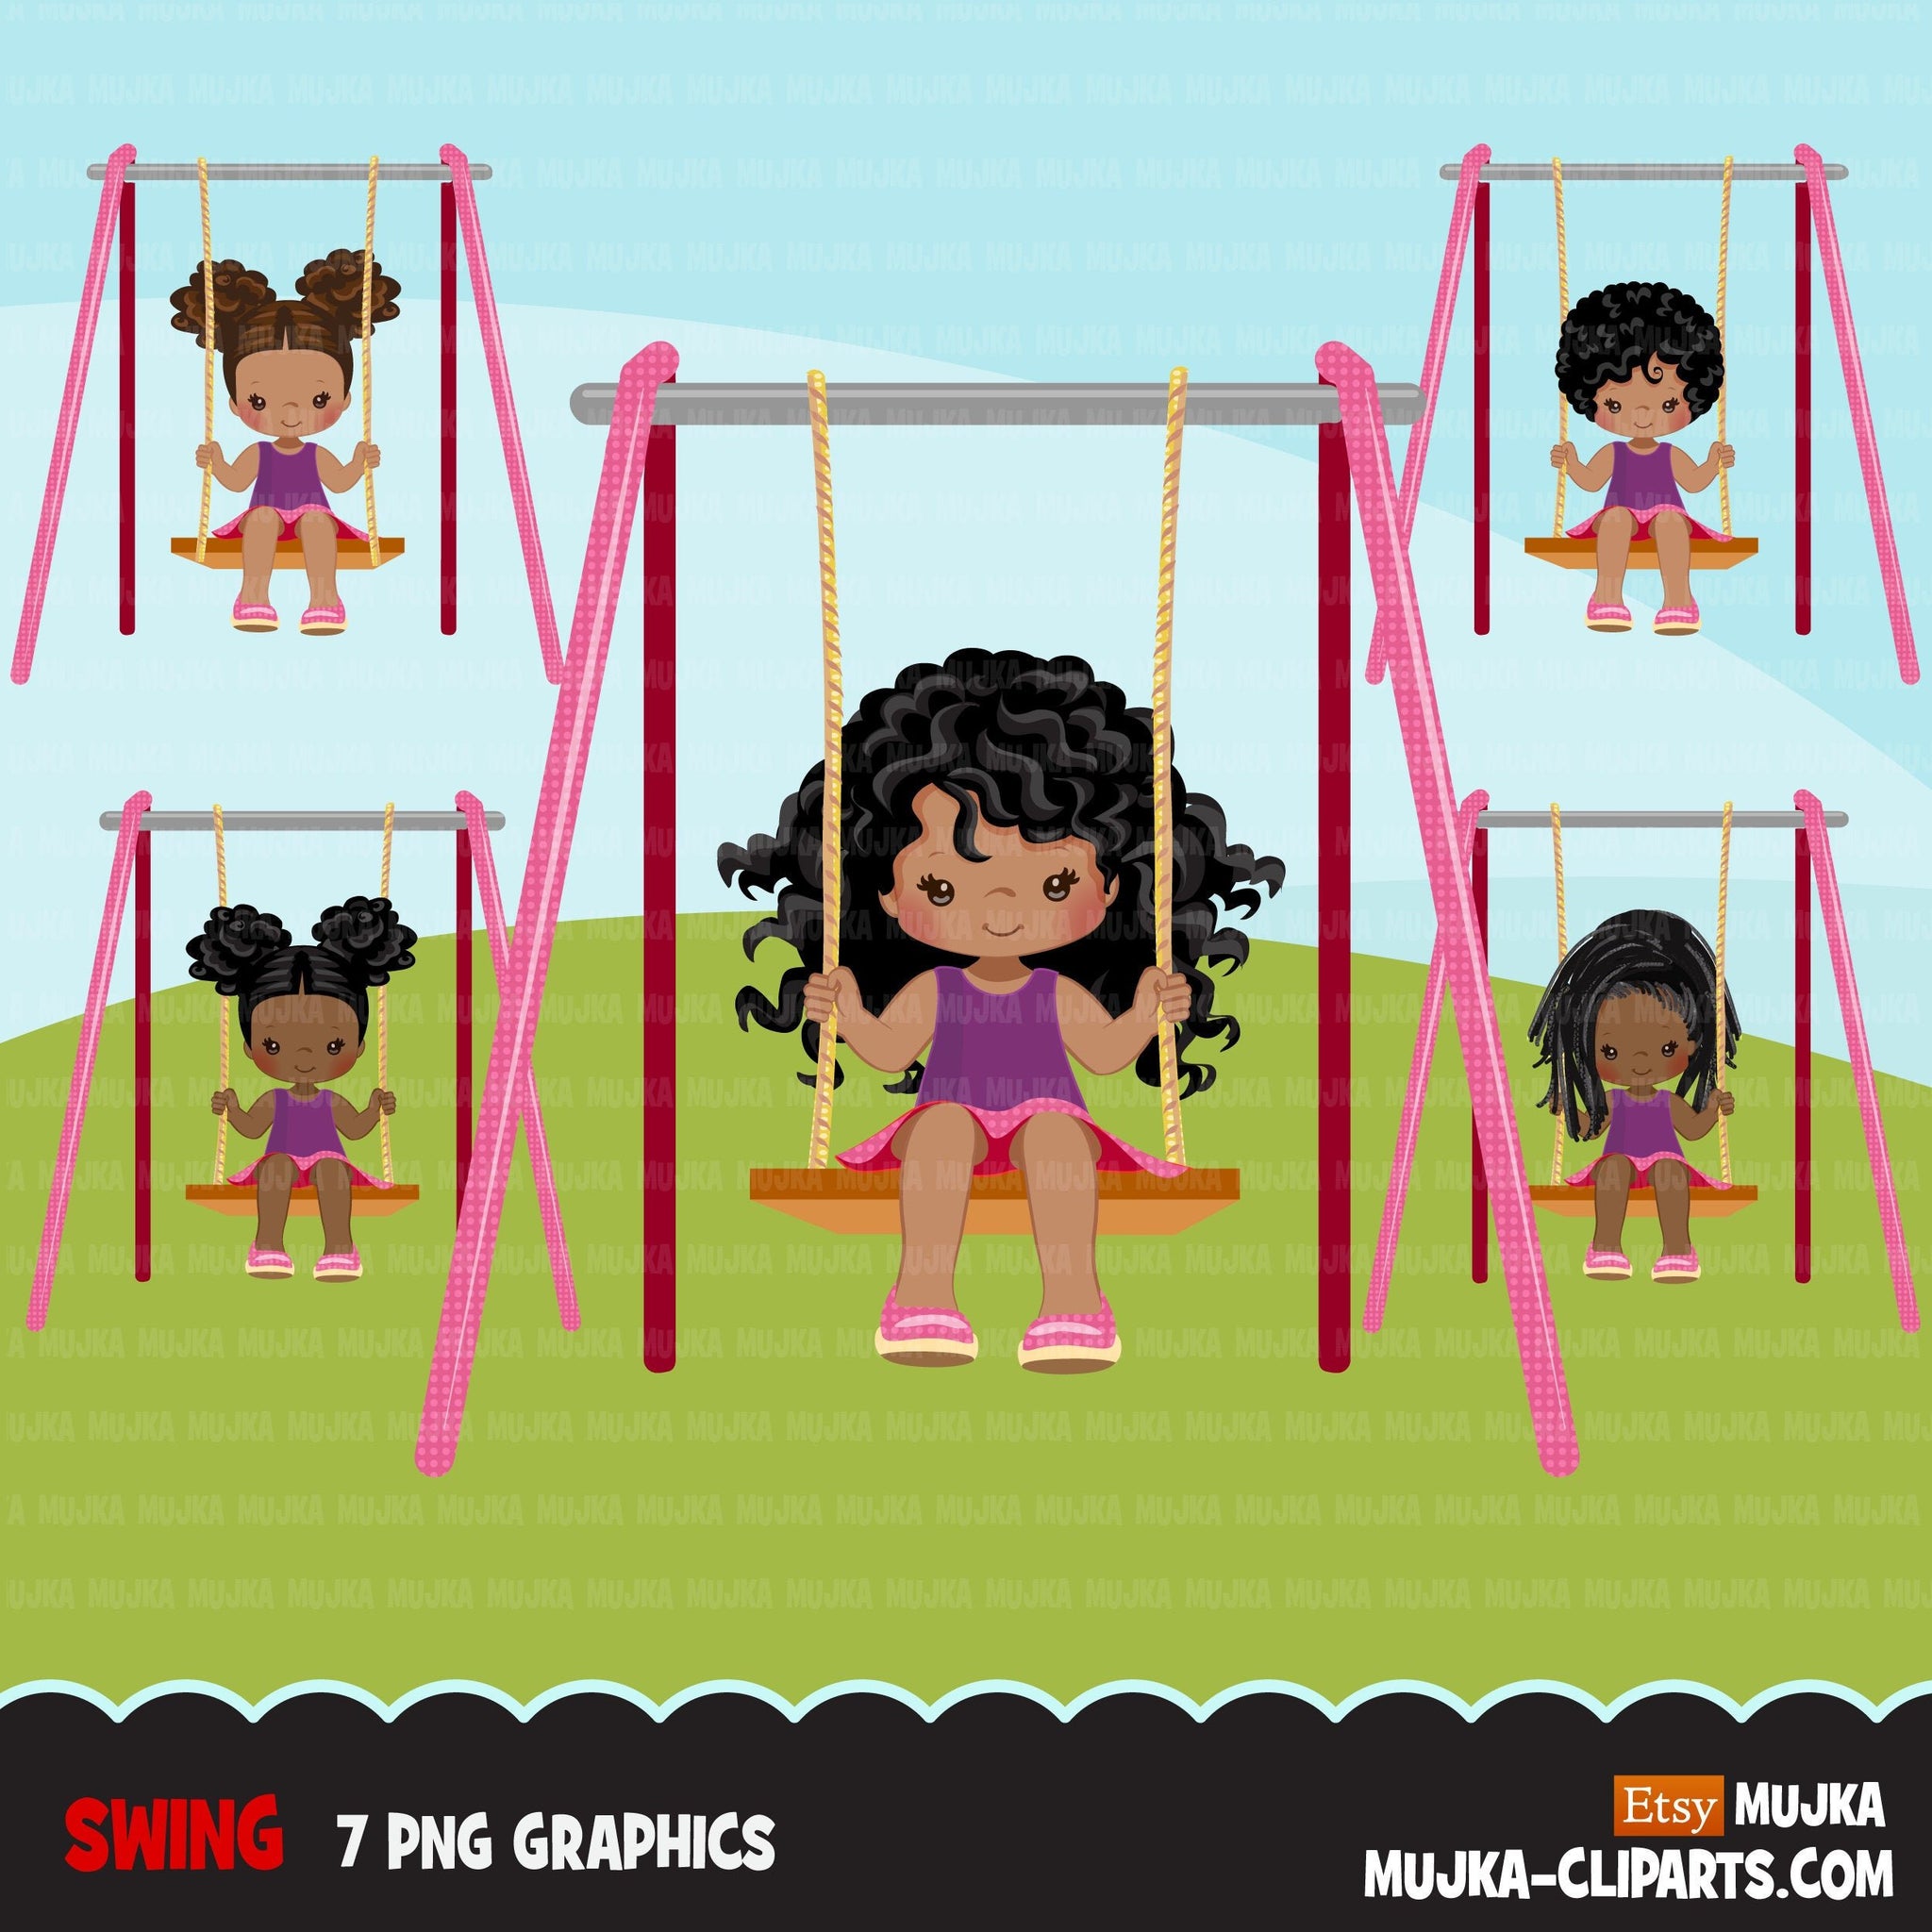 Playground Clipart, black girl swinging, spring, outdoors park swing graphics, commercial use Png clip art